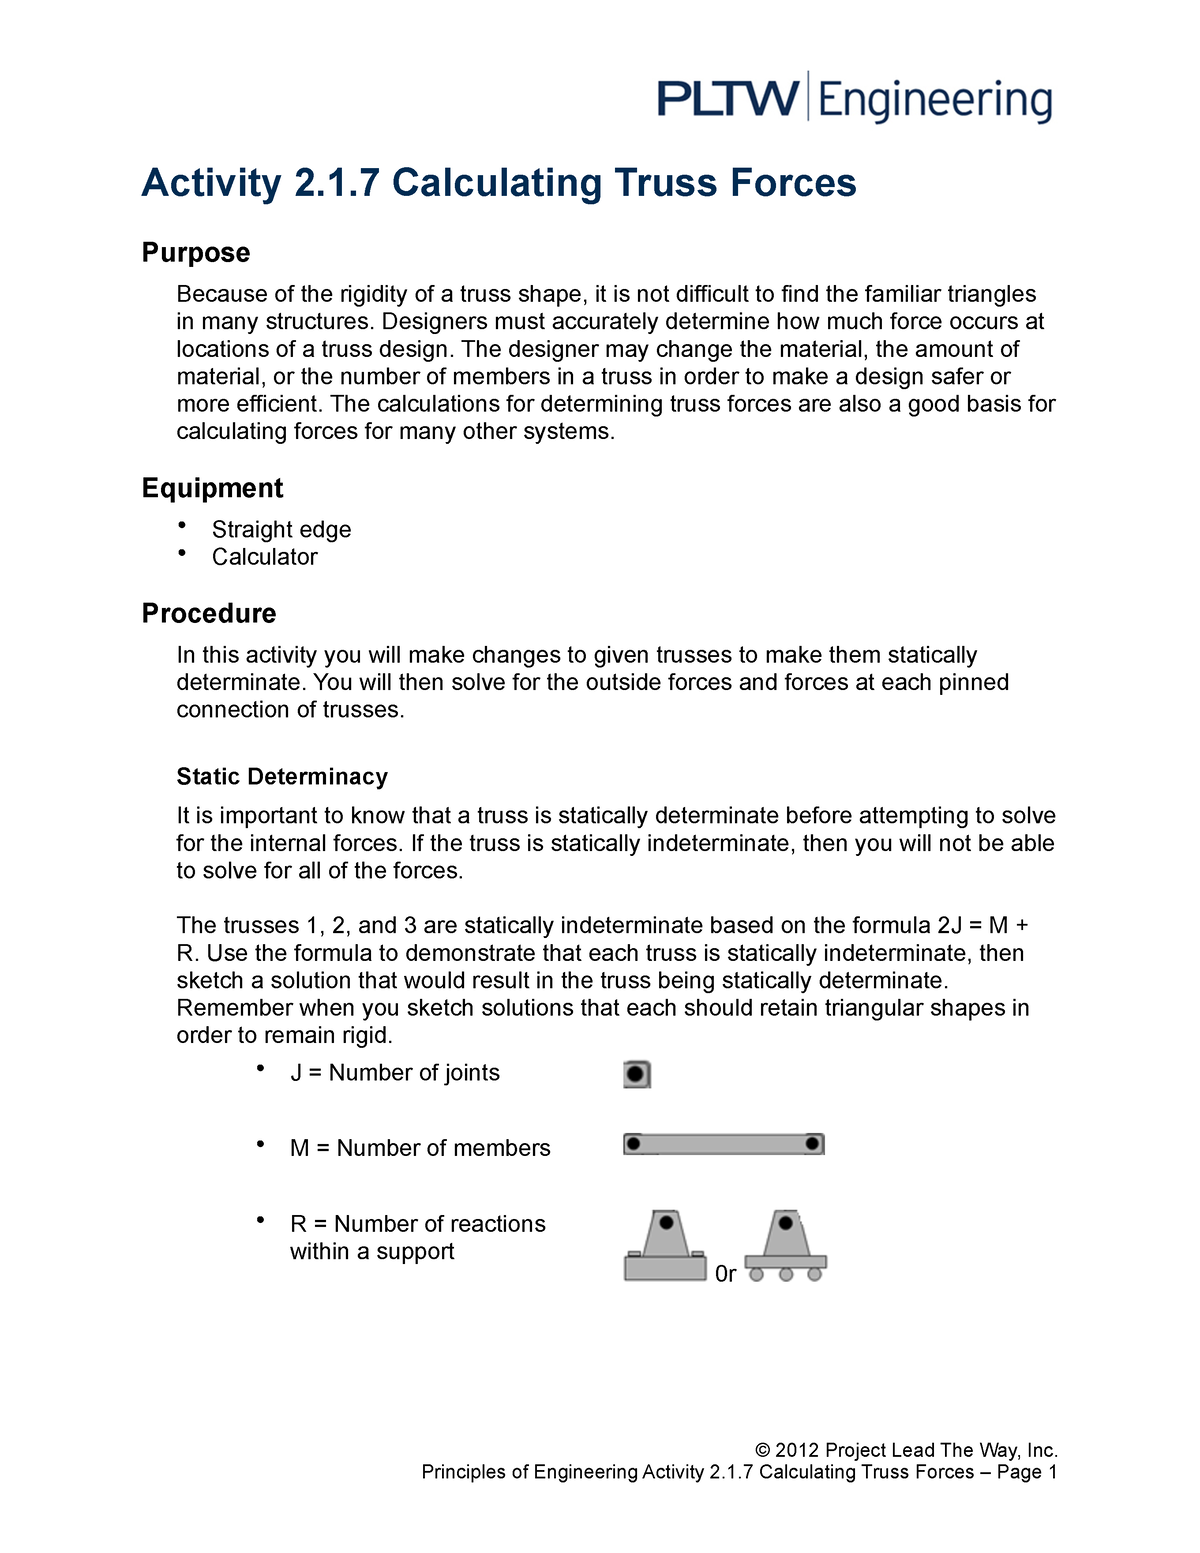 2-principles-of-engineering-poe-pltw-assignment-activity-2-1-calculating-truss-forces